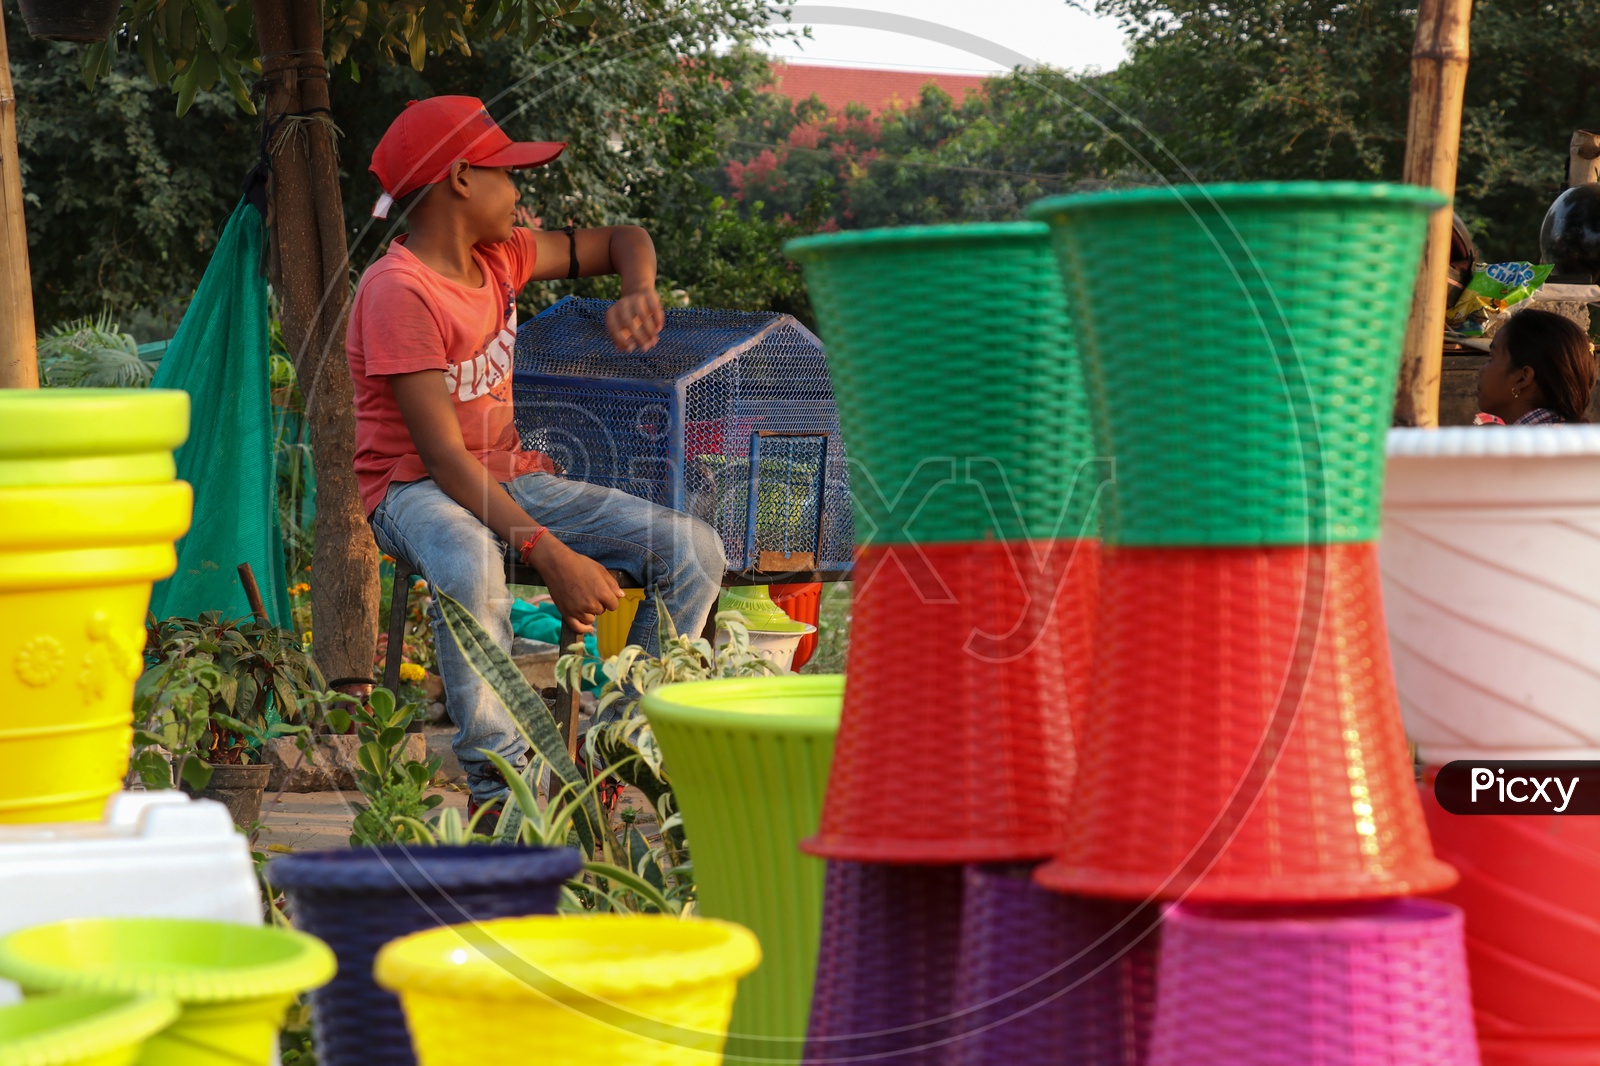 Colorful Flower Pots Being Selling at a Road Side Vendor Stall